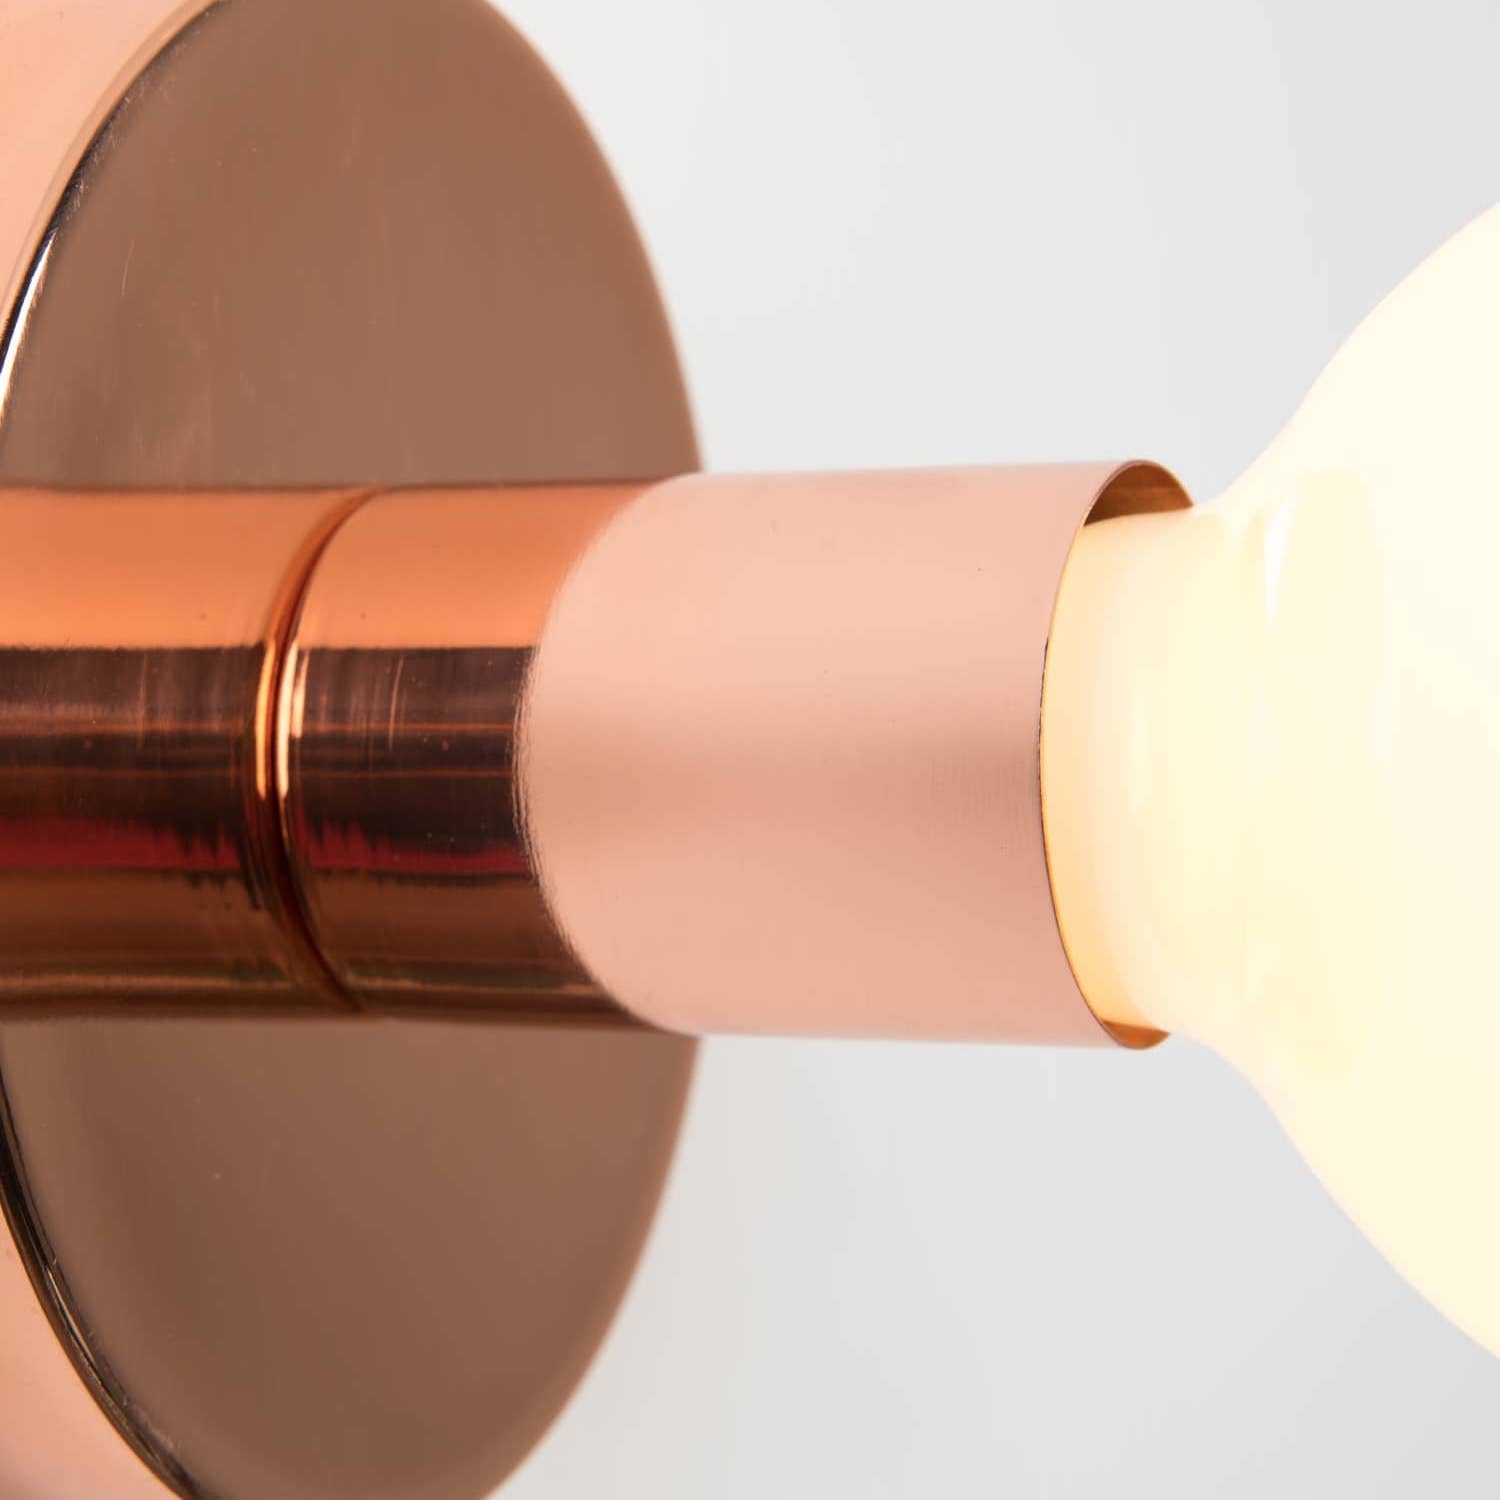 detail photo Button Plug-In Sconce in Raw Brass finish with G40 bulb.